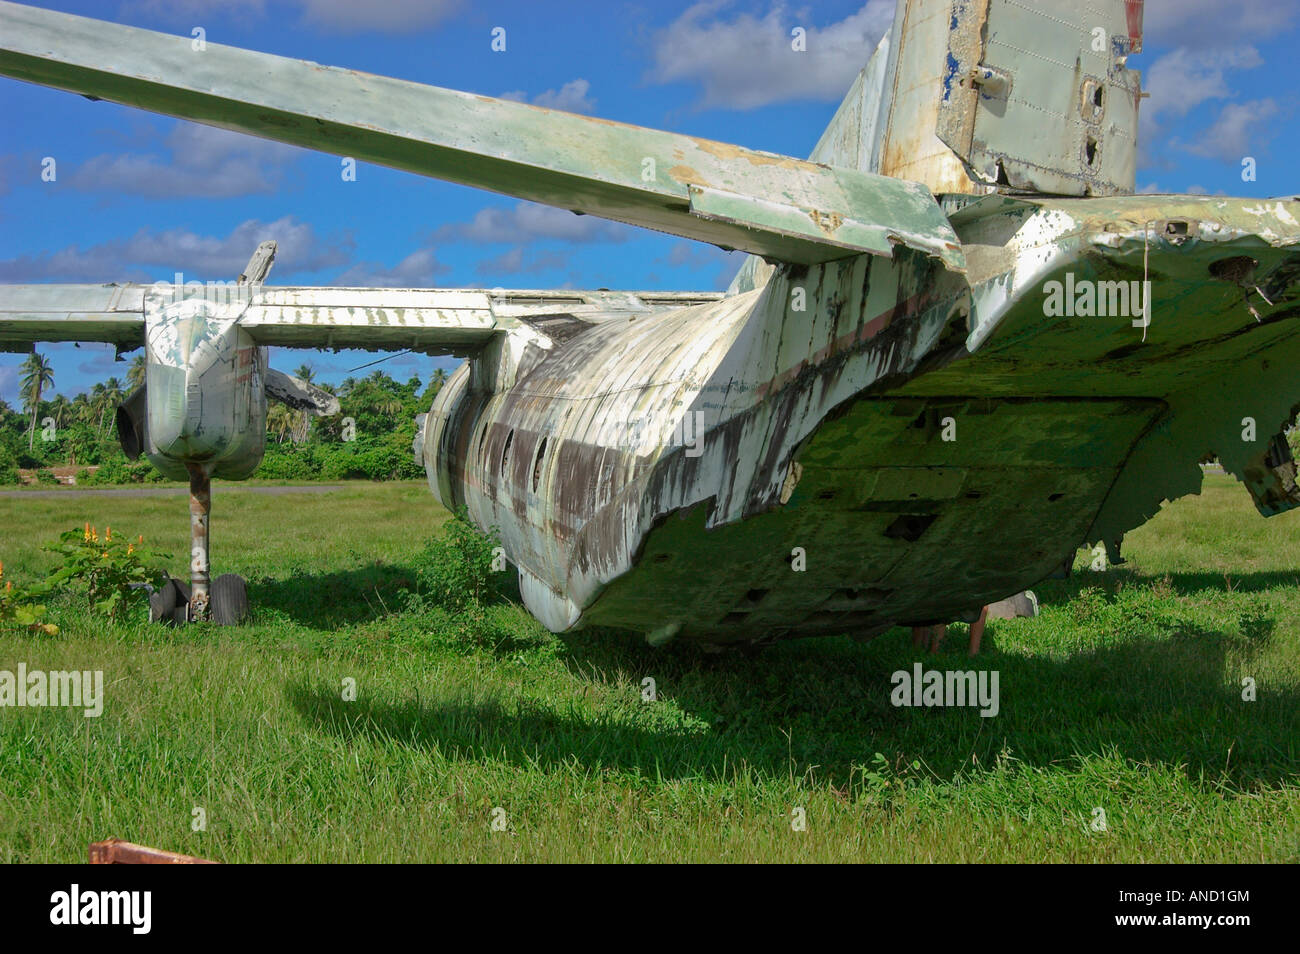 An abandoned aeroplane sits rusting in an empty field, relic of the coup in October 1983 Stock Photo